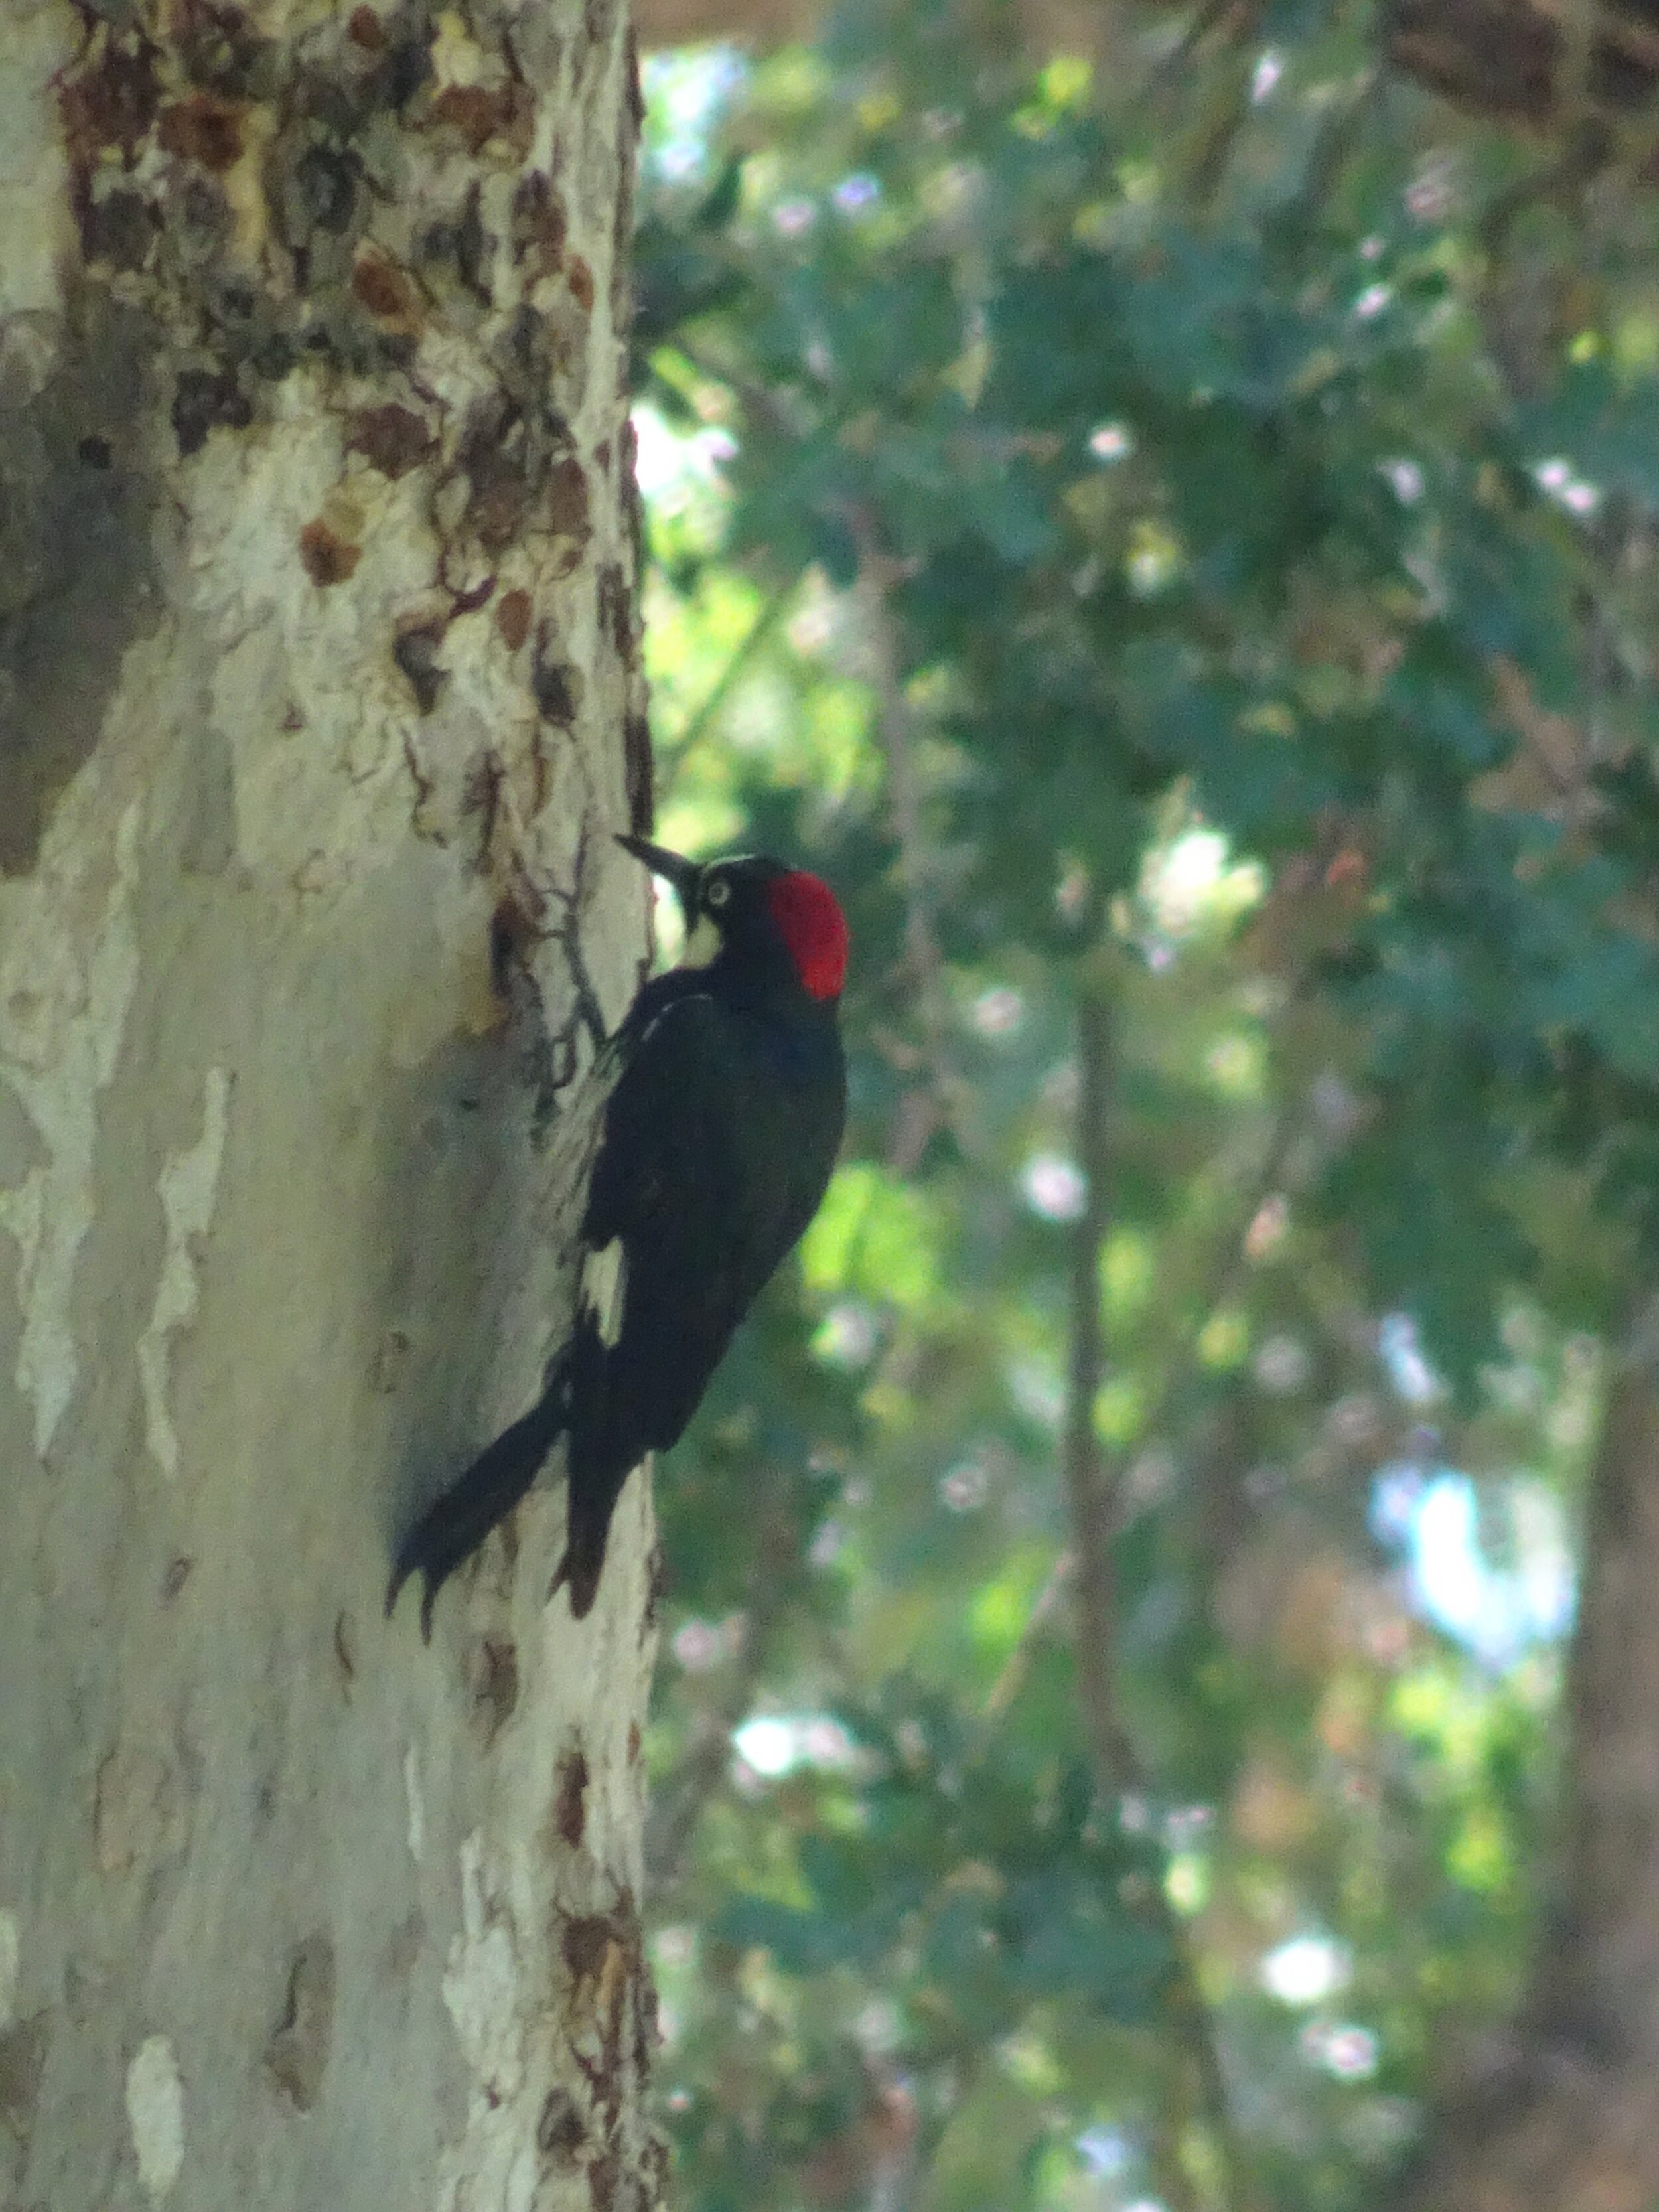 Our other wildlife spotting, a woodpecker in Bidwell Park, Chico, CA.  Photo by Karen Boudreaux, June 6, 2021